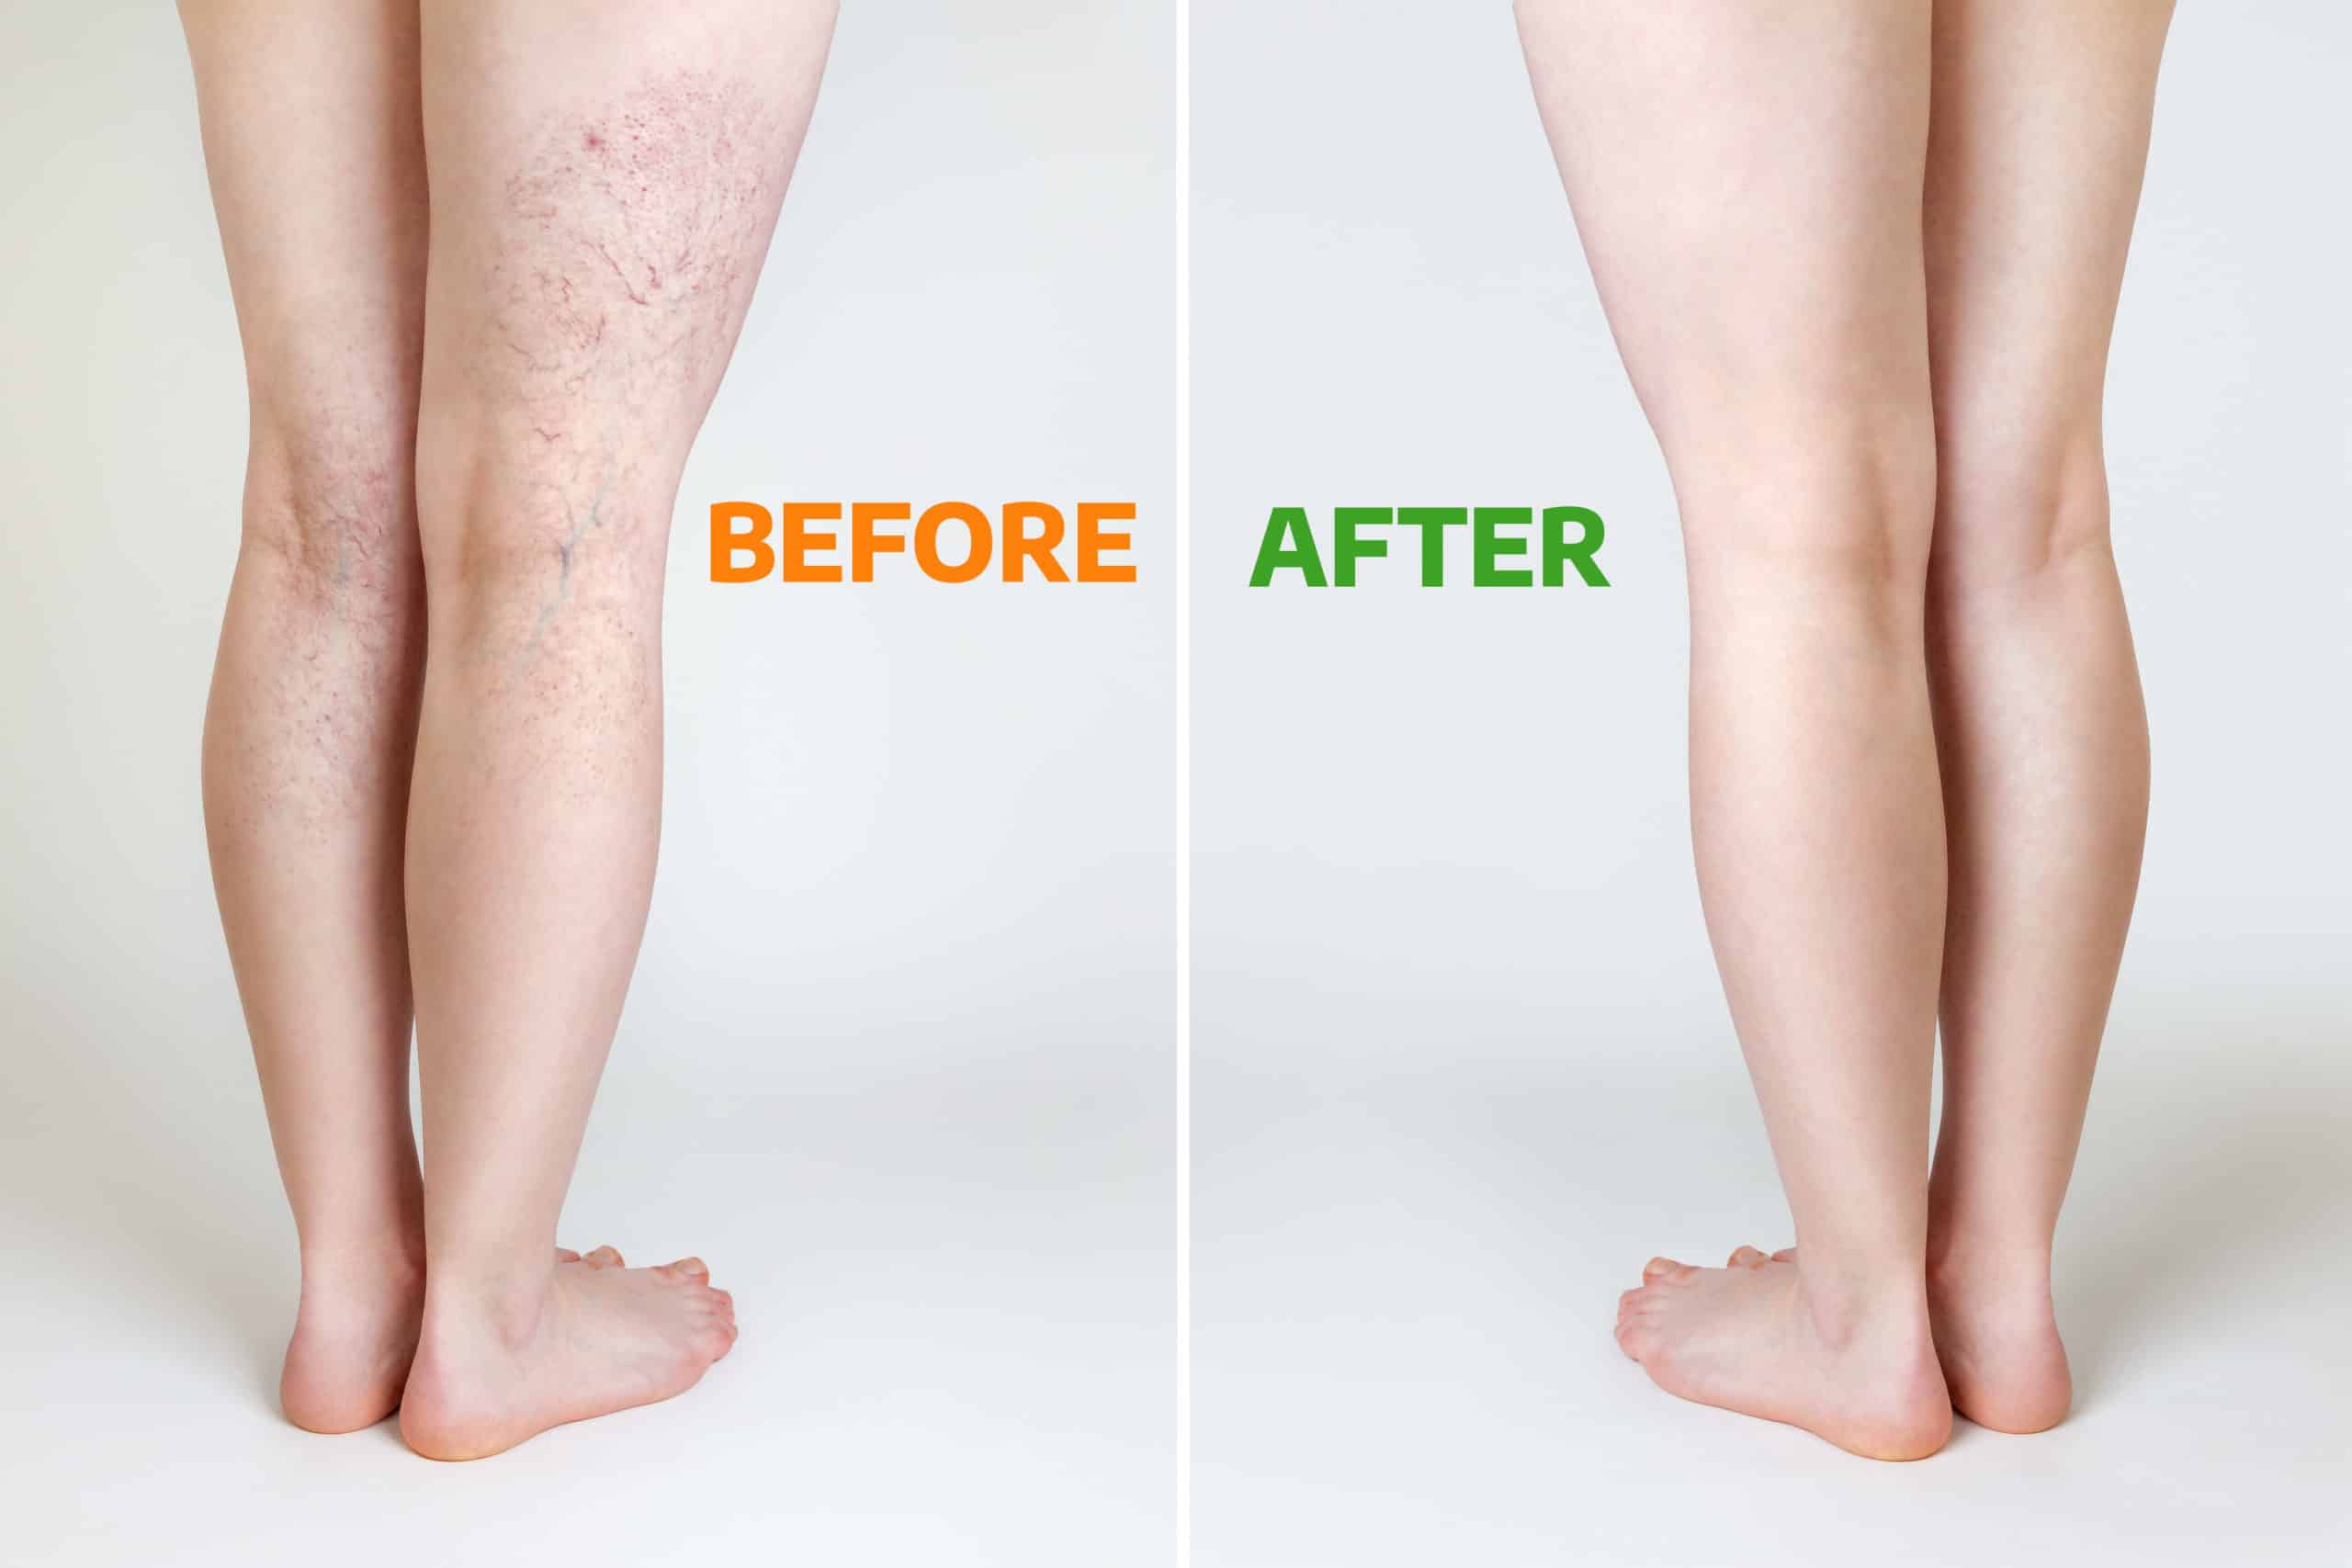 Legs before and after Sclerotherapy | Bellava Aesthetics in Crestview Hills, KY